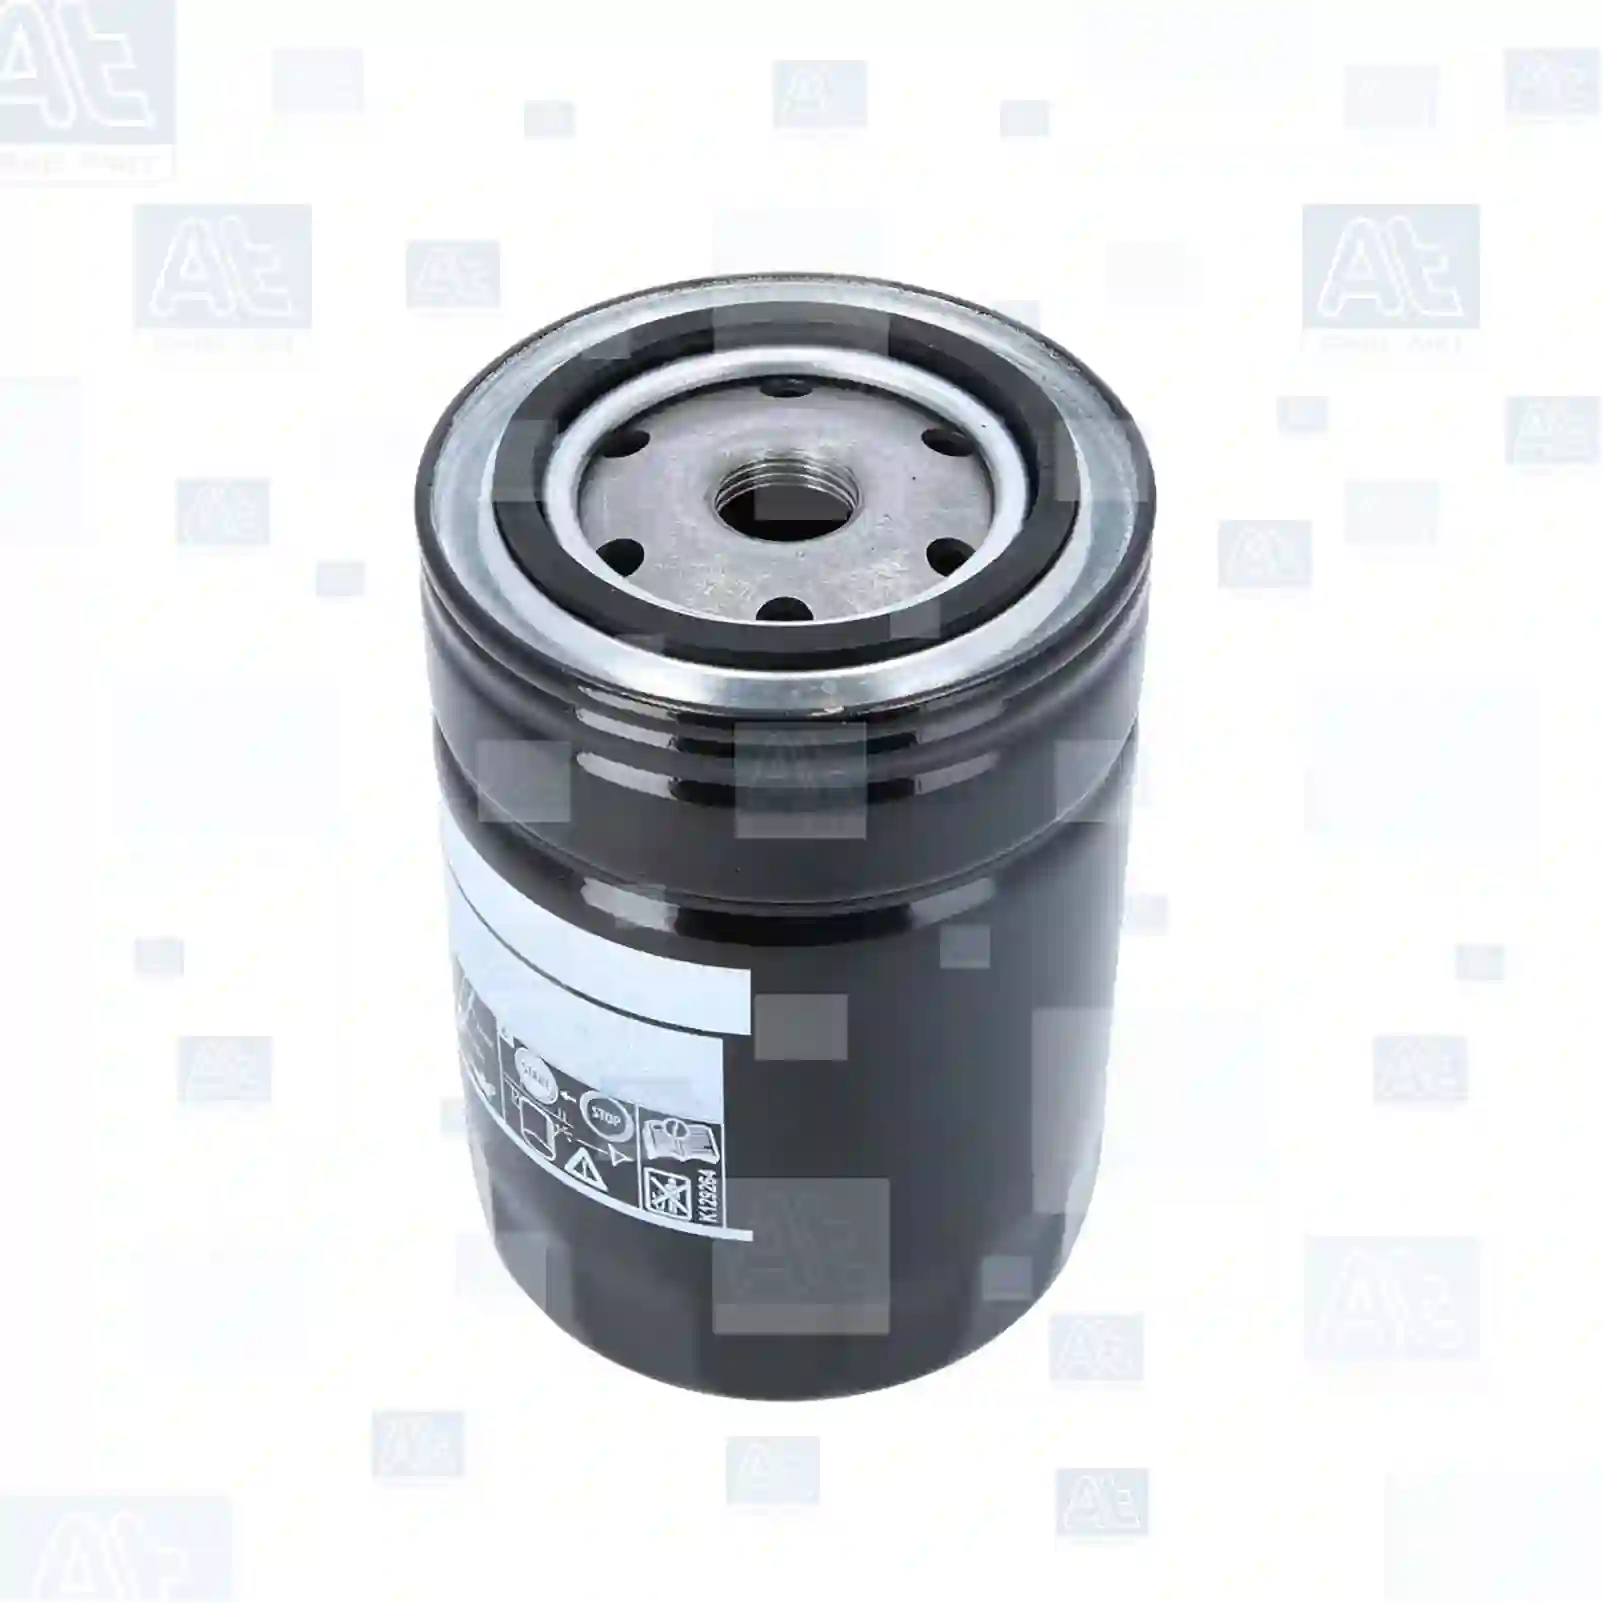 Oil filter, at no 77701169, oem no: 2089505, 1931165, 925229, 925229C91, 1560187700, 01909102, 00451341, 01836106, 01901602, 01907567, 01909102, 02654392, 04027979, 04135600, 04513411, 04602186, 04607360, 04608186, 04625546, 04630787, 14730587, 1901602546230, 41356000, 46307873, 62775369, 704625547, 70451341, 71961003, 74027979, 74513411, 74602186, 74607360, 74608186, 74625546, 74630687, 74630787, 74730587, 75144632, 75413411, 86546609, 5000862, 5001386, 9613343, DNP553411, 5579920, 5579970, 7984951, 24419340010, 01901602, 01907567, 03141914, 03563591, 1901602, 1907567, 24151018, 5000044487, 74027979, 74730587, 70000-5750-0, 00411553001, 24419340010, 01901602, 01909102, 02654392, 04027979, 04135600, 04222406, 04602186, 04607360, 04608186, 04625546, 04630787, 04730587, 71961003, 74027979, 74513411, 00024151017, 2704880M1, 84221215, 993071, 0500044487, 6000141020, 6005019791, 6005025600, 6005919776, LUS35, 0411553001, 04115560, 04415530, 24419340010, 244193499, 1909102, 795660, 7956600, 400000401 At Spare Part | Engine, Accelerator Pedal, Camshaft, Connecting Rod, Crankcase, Crankshaft, Cylinder Head, Engine Suspension Mountings, Exhaust Manifold, Exhaust Gas Recirculation, Filter Kits, Flywheel Housing, General Overhaul Kits, Engine, Intake Manifold, Oil Cleaner, Oil Cooler, Oil Filter, Oil Pump, Oil Sump, Piston & Liner, Sensor & Switch, Timing Case, Turbocharger, Cooling System, Belt Tensioner, Coolant Filter, Coolant Pipe, Corrosion Prevention Agent, Drive, Expansion Tank, Fan, Intercooler, Monitors & Gauges, Radiator, Thermostat, V-Belt / Timing belt, Water Pump, Fuel System, Electronical Injector Unit, Feed Pump, Fuel Filter, cpl., Fuel Gauge Sender,  Fuel Line, Fuel Pump, Fuel Tank, Injection Line Kit, Injection Pump, Exhaust System, Clutch & Pedal, Gearbox, Propeller Shaft, Axles, Brake System, Hubs & Wheels, Suspension, Leaf Spring, Universal Parts / Accessories, Steering, Electrical System, Cabin Oil filter, at no 77701169, oem no: 2089505, 1931165, 925229, 925229C91, 1560187700, 01909102, 00451341, 01836106, 01901602, 01907567, 01909102, 02654392, 04027979, 04135600, 04513411, 04602186, 04607360, 04608186, 04625546, 04630787, 14730587, 1901602546230, 41356000, 46307873, 62775369, 704625547, 70451341, 71961003, 74027979, 74513411, 74602186, 74607360, 74608186, 74625546, 74630687, 74630787, 74730587, 75144632, 75413411, 86546609, 5000862, 5001386, 9613343, DNP553411, 5579920, 5579970, 7984951, 24419340010, 01901602, 01907567, 03141914, 03563591, 1901602, 1907567, 24151018, 5000044487, 74027979, 74730587, 70000-5750-0, 00411553001, 24419340010, 01901602, 01909102, 02654392, 04027979, 04135600, 04222406, 04602186, 04607360, 04608186, 04625546, 04630787, 04730587, 71961003, 74027979, 74513411, 00024151017, 2704880M1, 84221215, 993071, 0500044487, 6000141020, 6005019791, 6005025600, 6005919776, LUS35, 0411553001, 04115560, 04415530, 24419340010, 244193499, 1909102, 795660, 7956600, 400000401 At Spare Part | Engine, Accelerator Pedal, Camshaft, Connecting Rod, Crankcase, Crankshaft, Cylinder Head, Engine Suspension Mountings, Exhaust Manifold, Exhaust Gas Recirculation, Filter Kits, Flywheel Housing, General Overhaul Kits, Engine, Intake Manifold, Oil Cleaner, Oil Cooler, Oil Filter, Oil Pump, Oil Sump, Piston & Liner, Sensor & Switch, Timing Case, Turbocharger, Cooling System, Belt Tensioner, Coolant Filter, Coolant Pipe, Corrosion Prevention Agent, Drive, Expansion Tank, Fan, Intercooler, Monitors & Gauges, Radiator, Thermostat, V-Belt / Timing belt, Water Pump, Fuel System, Electronical Injector Unit, Feed Pump, Fuel Filter, cpl., Fuel Gauge Sender,  Fuel Line, Fuel Pump, Fuel Tank, Injection Line Kit, Injection Pump, Exhaust System, Clutch & Pedal, Gearbox, Propeller Shaft, Axles, Brake System, Hubs & Wheels, Suspension, Leaf Spring, Universal Parts / Accessories, Steering, Electrical System, Cabin